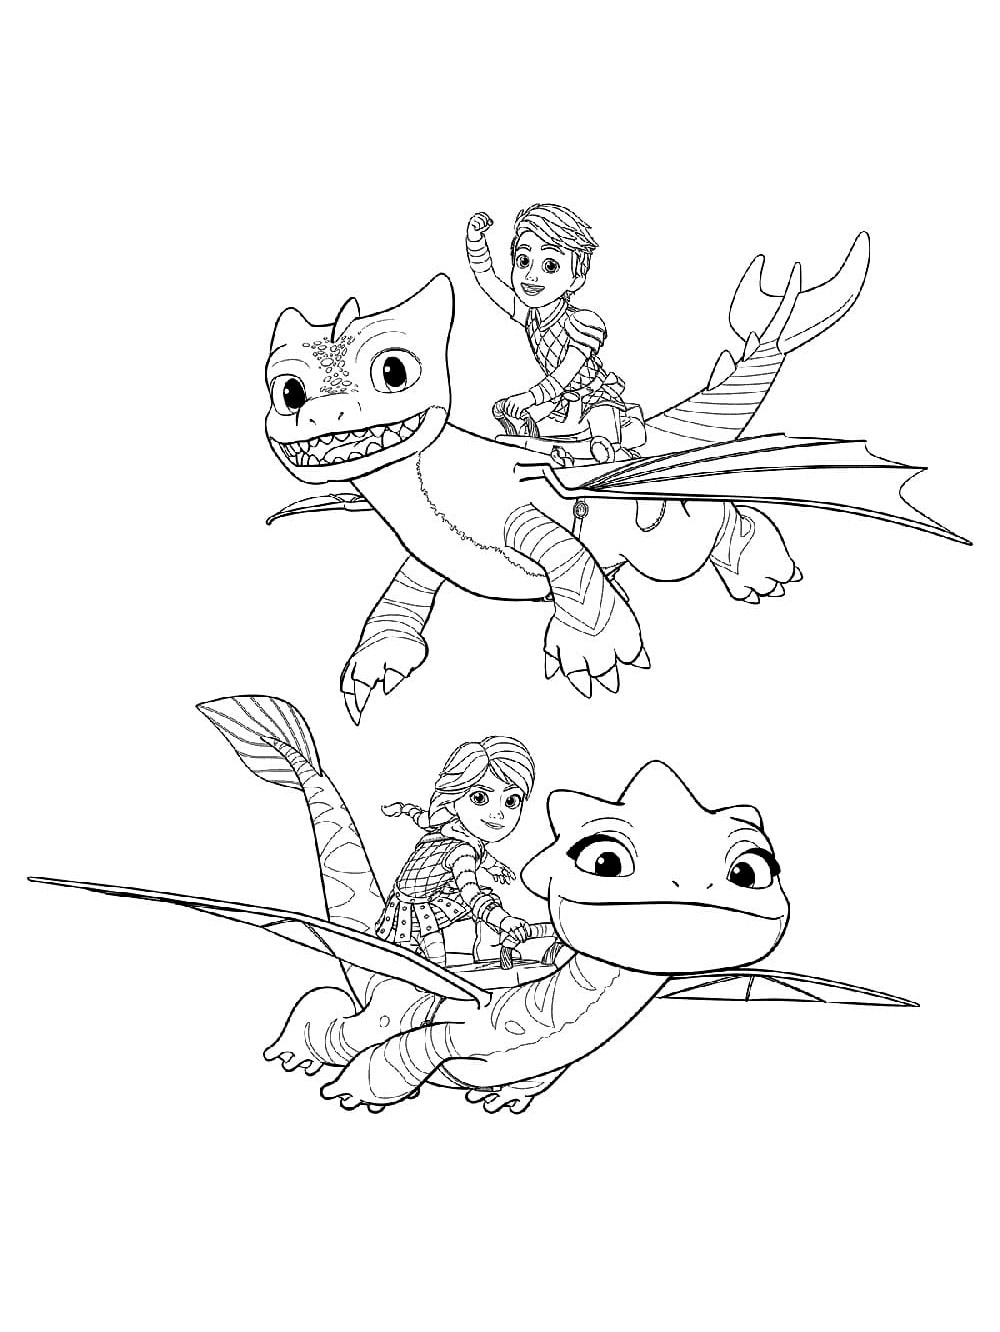 Dragons Rescue Riders coloring pages. Free printable Dragons Rescue Riders  coloring pages